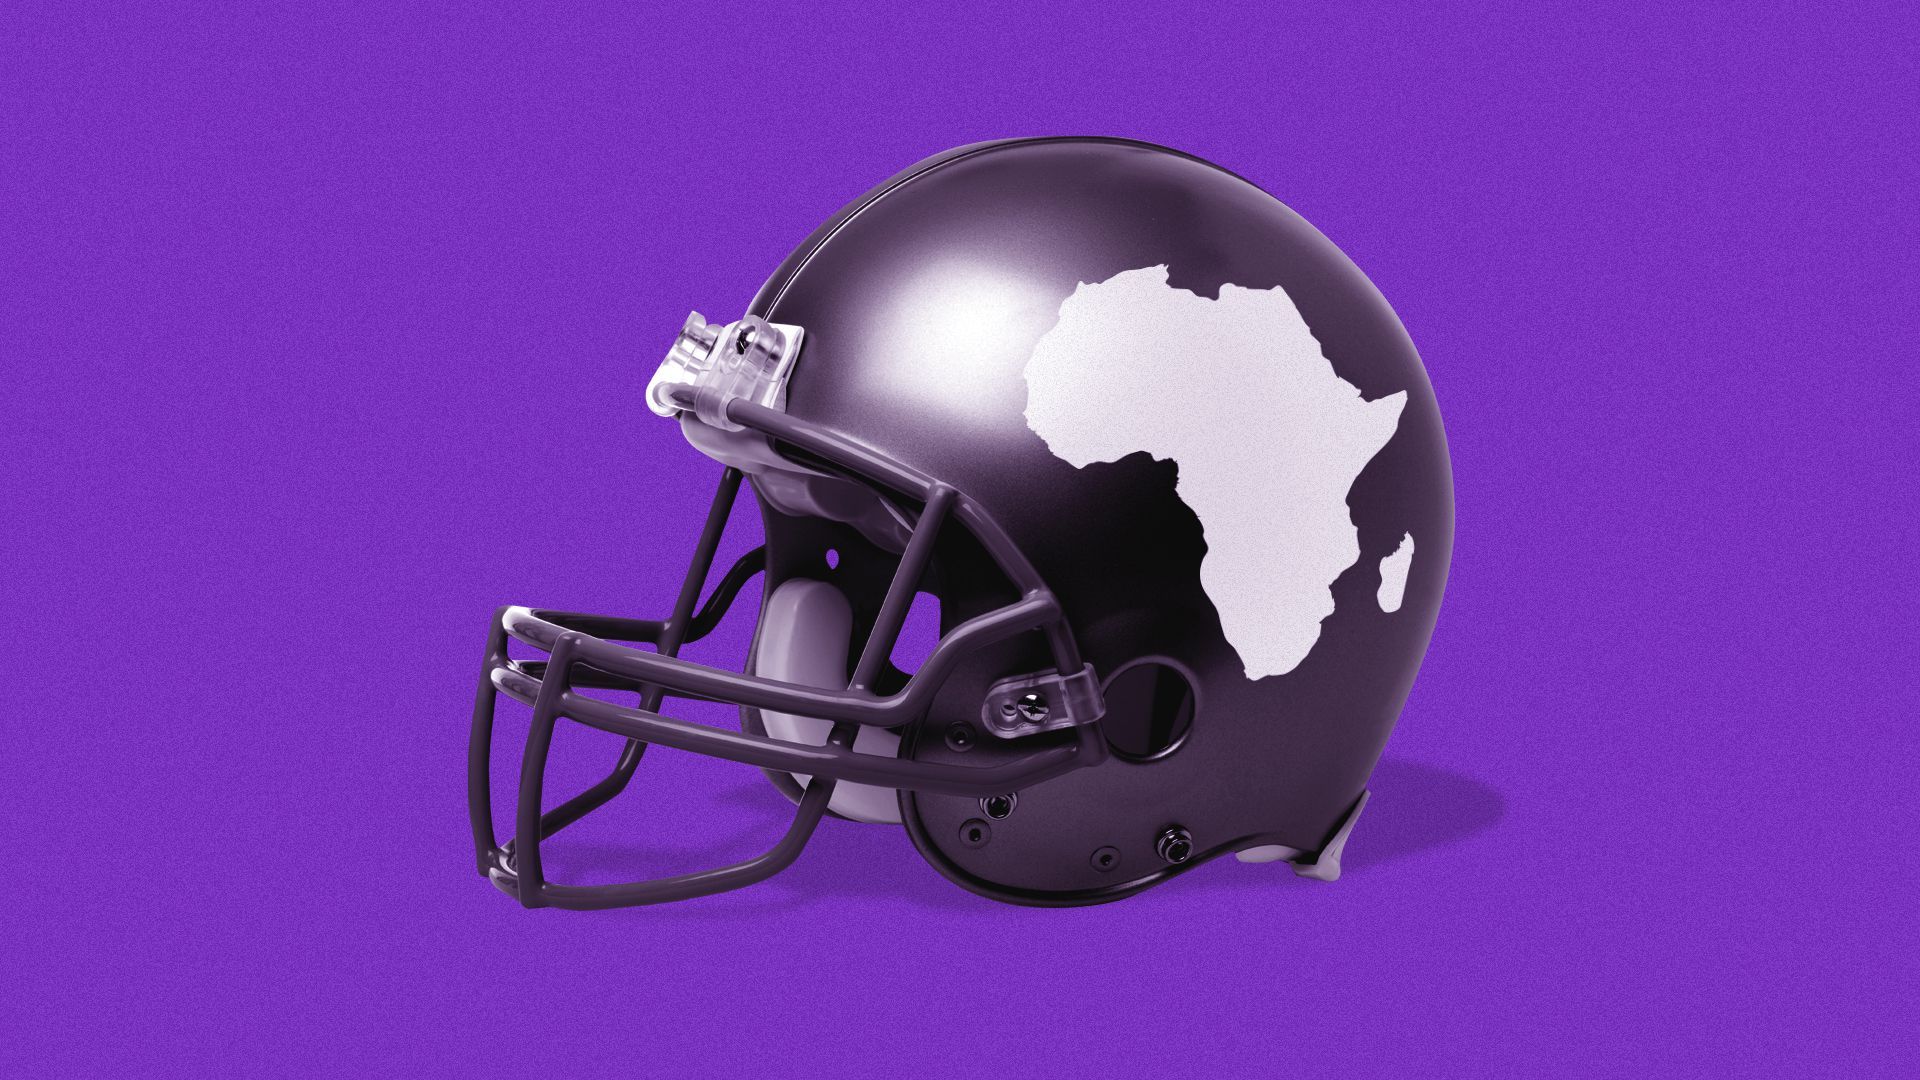 Illustration of a football helmet with the continent of Africa on it.